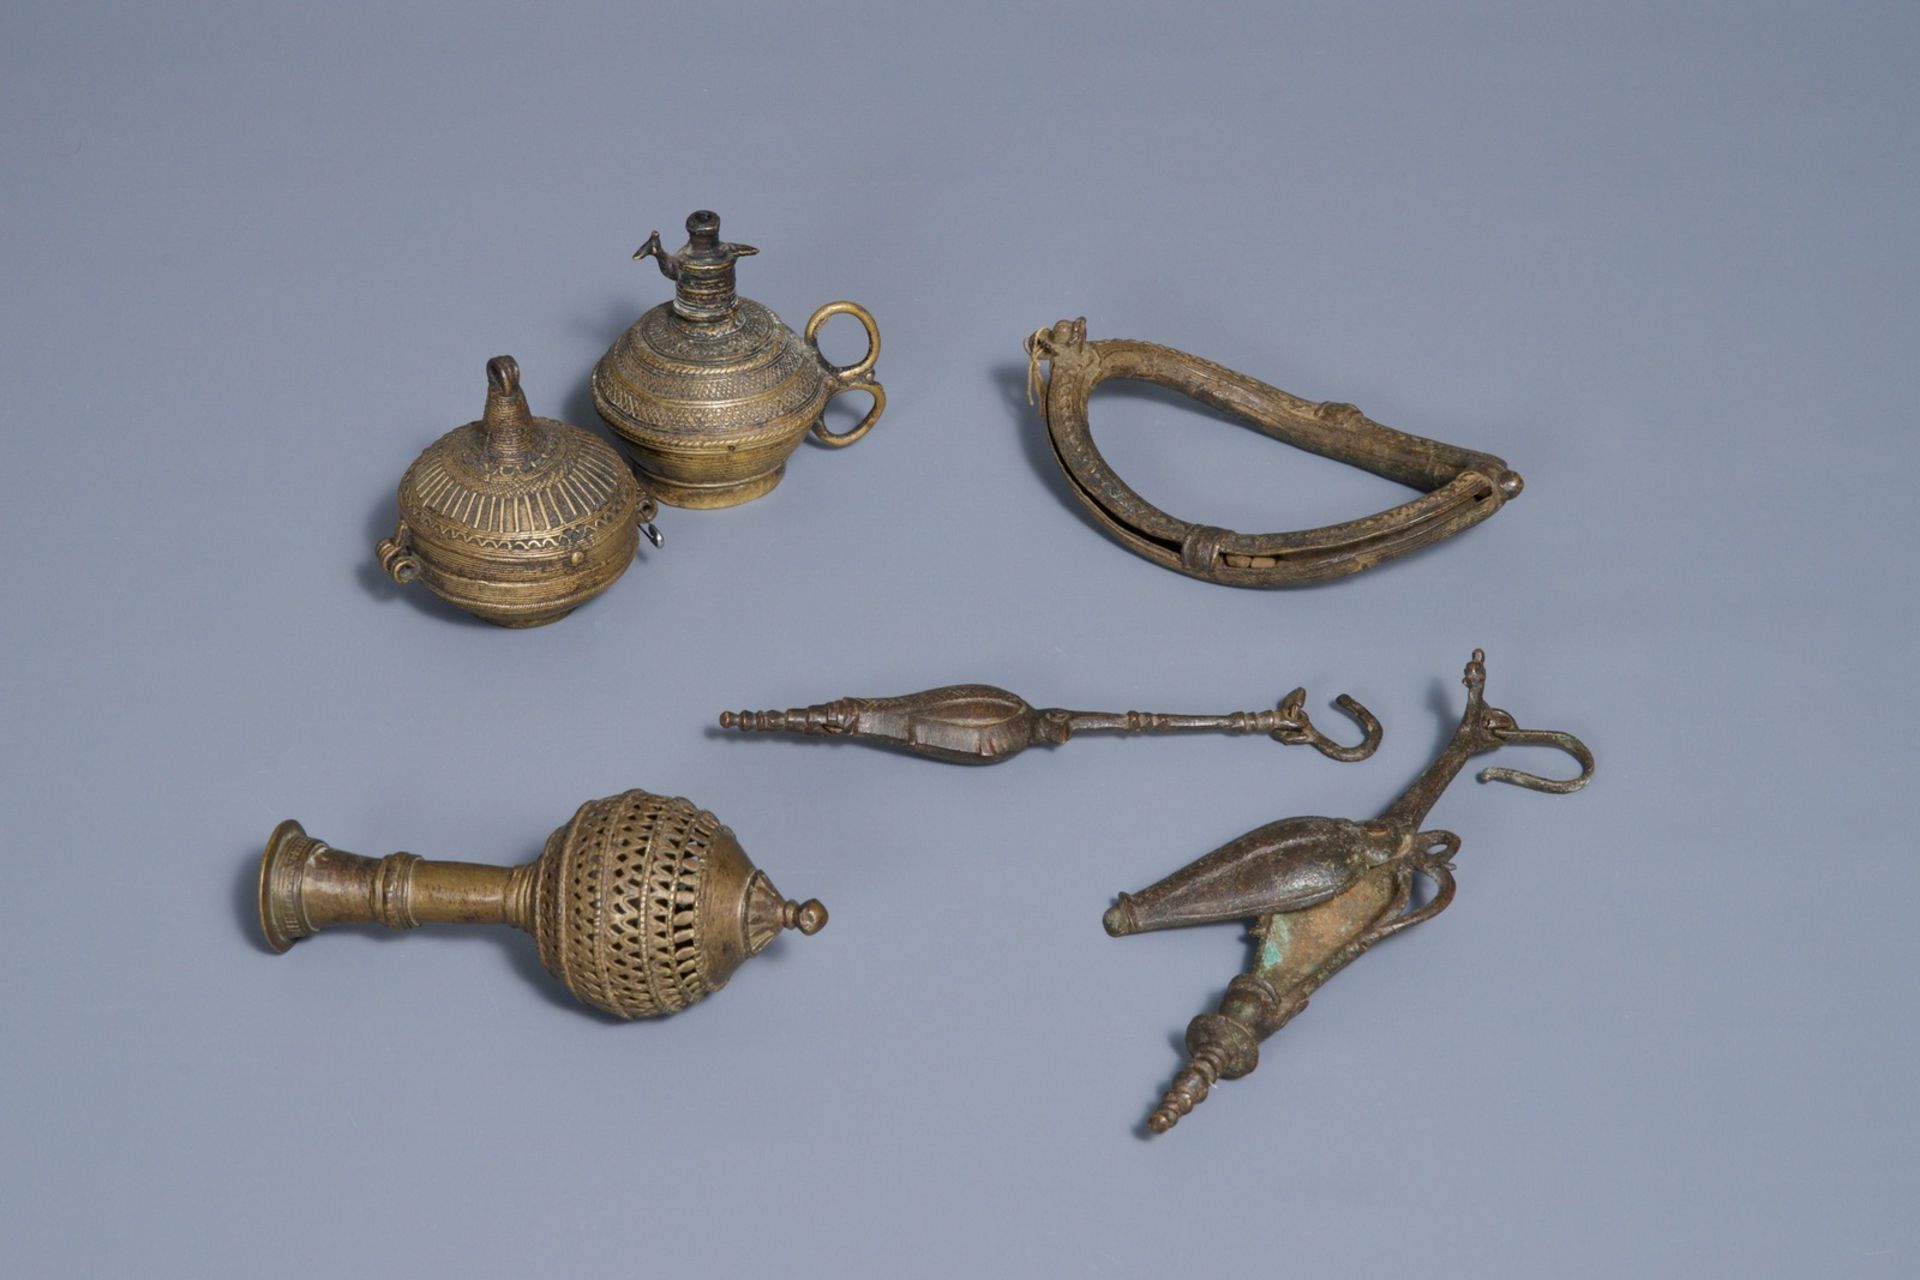 A group of silver and bronze statues and utensils, India, 18/19th C. - Image 2 of 4